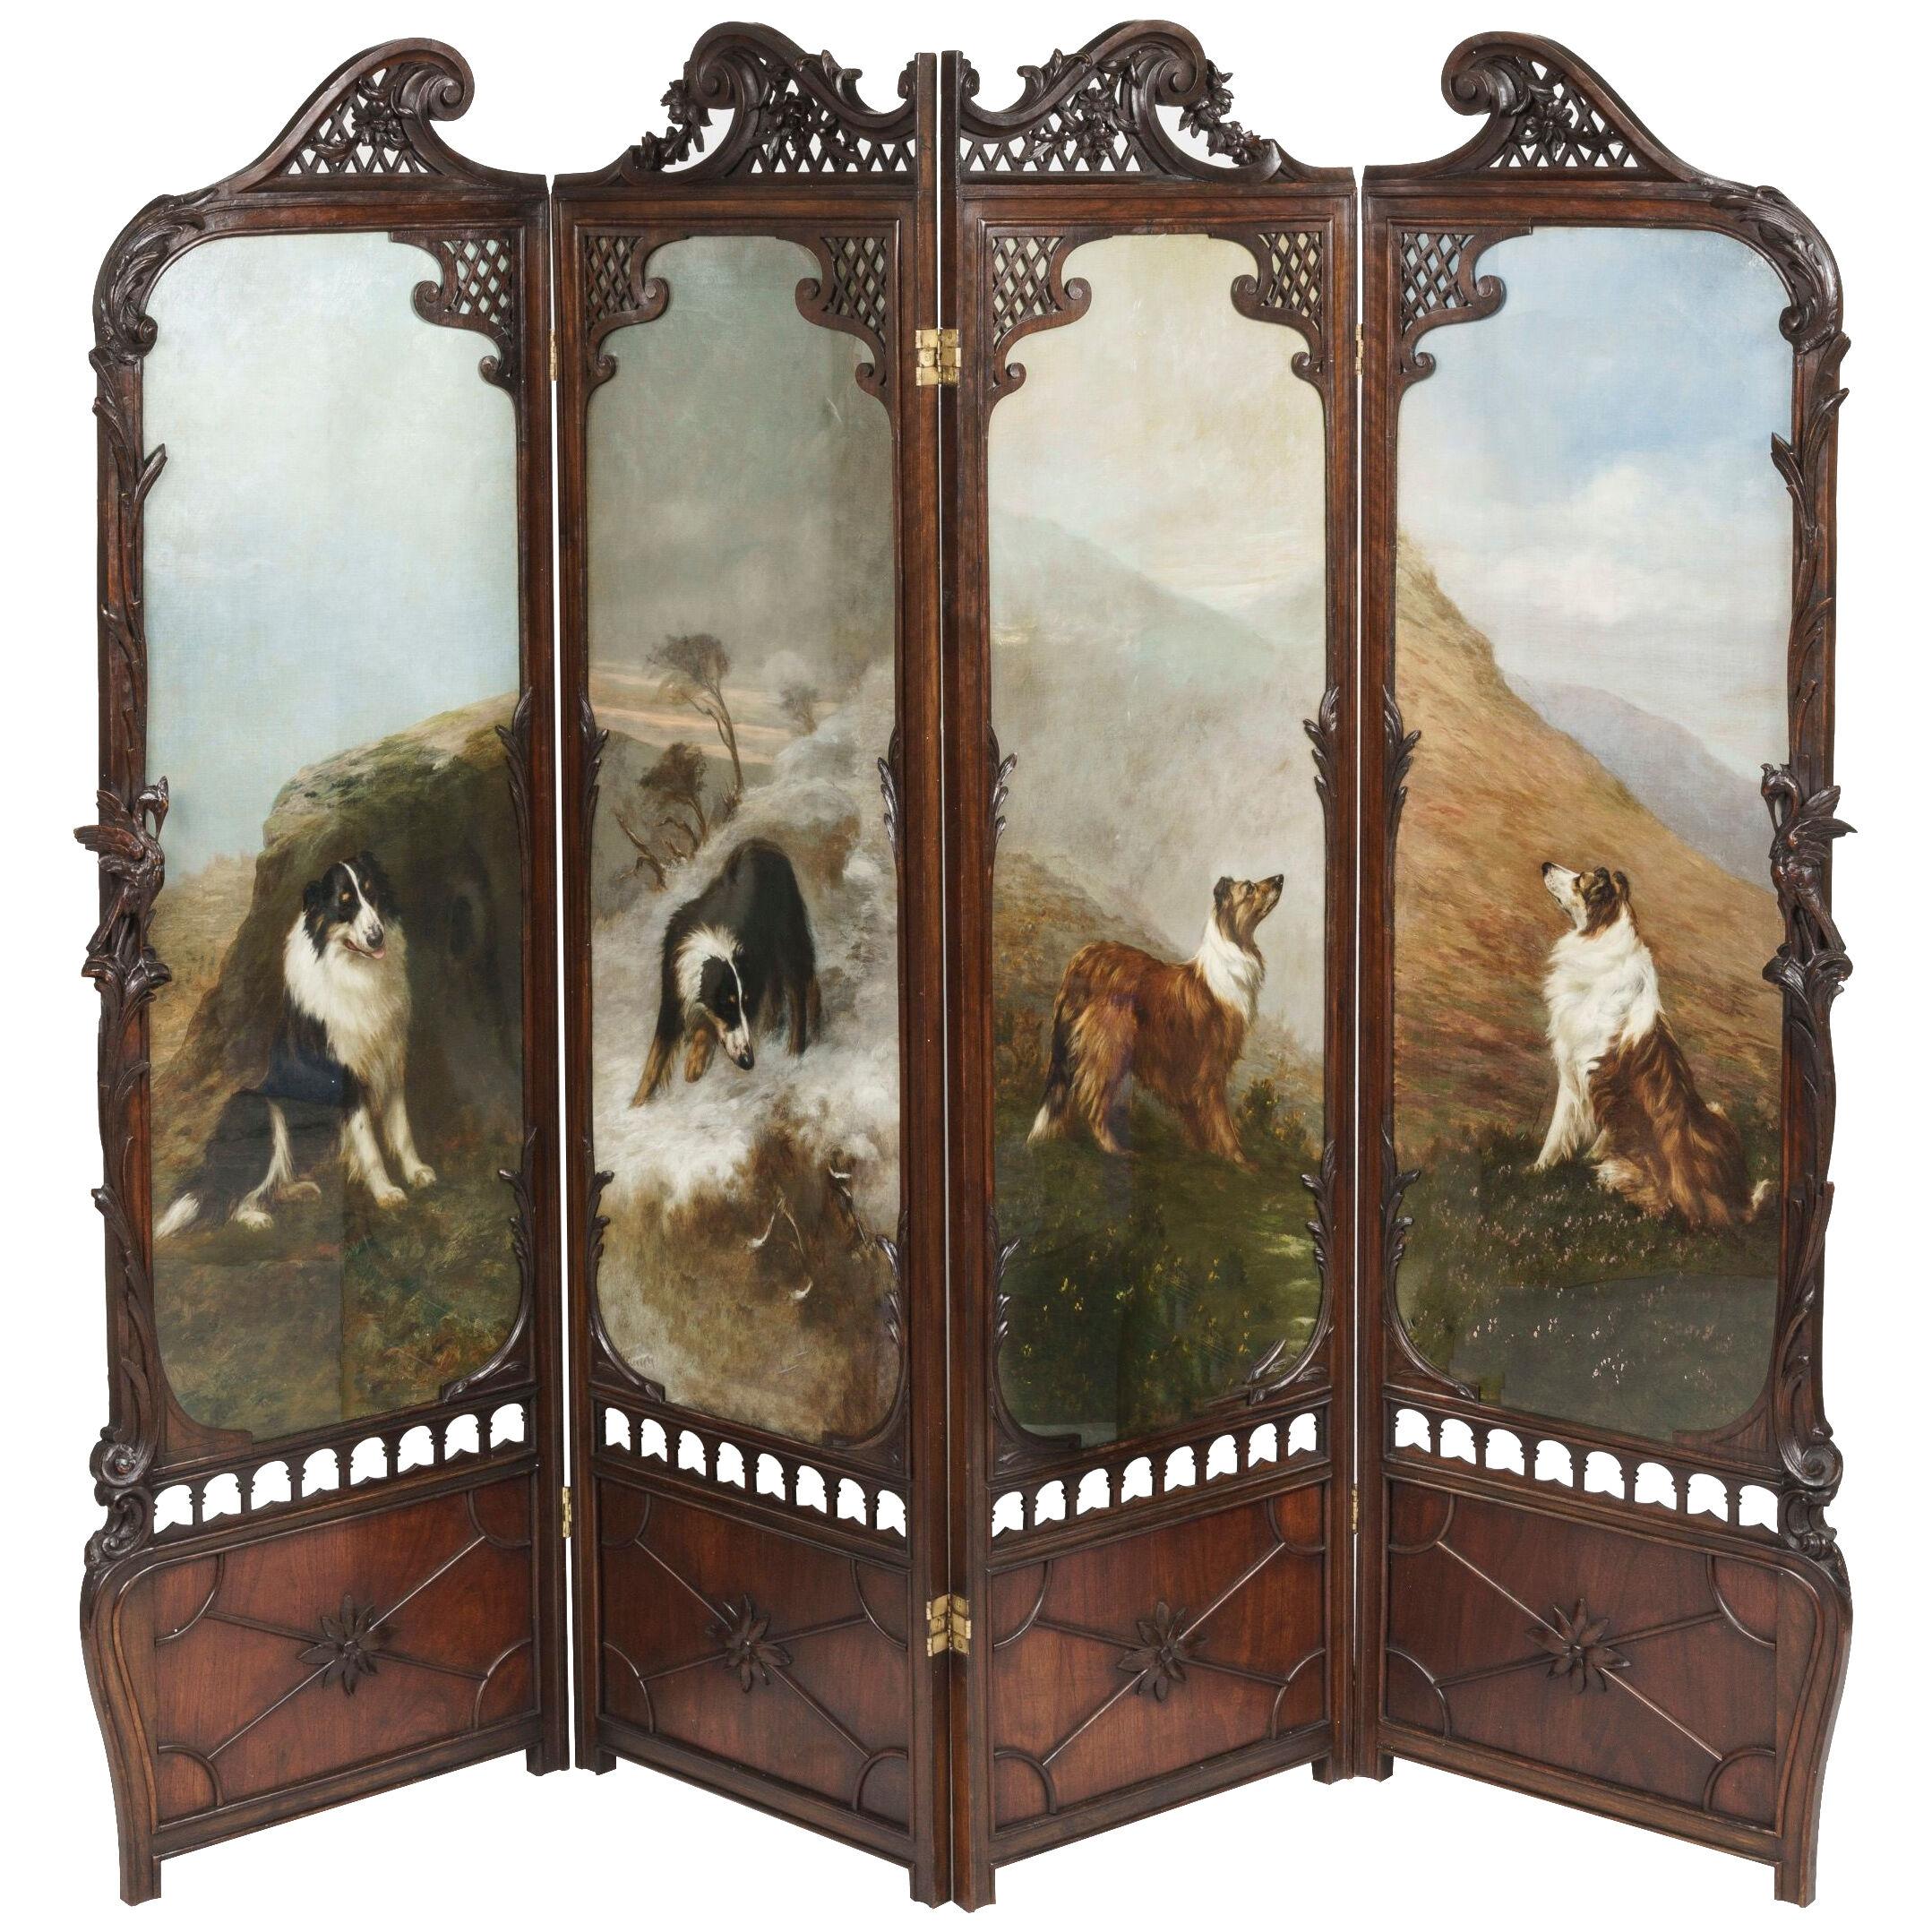 Antique Four-Fold Screen with Landscape Paintings with Dogs